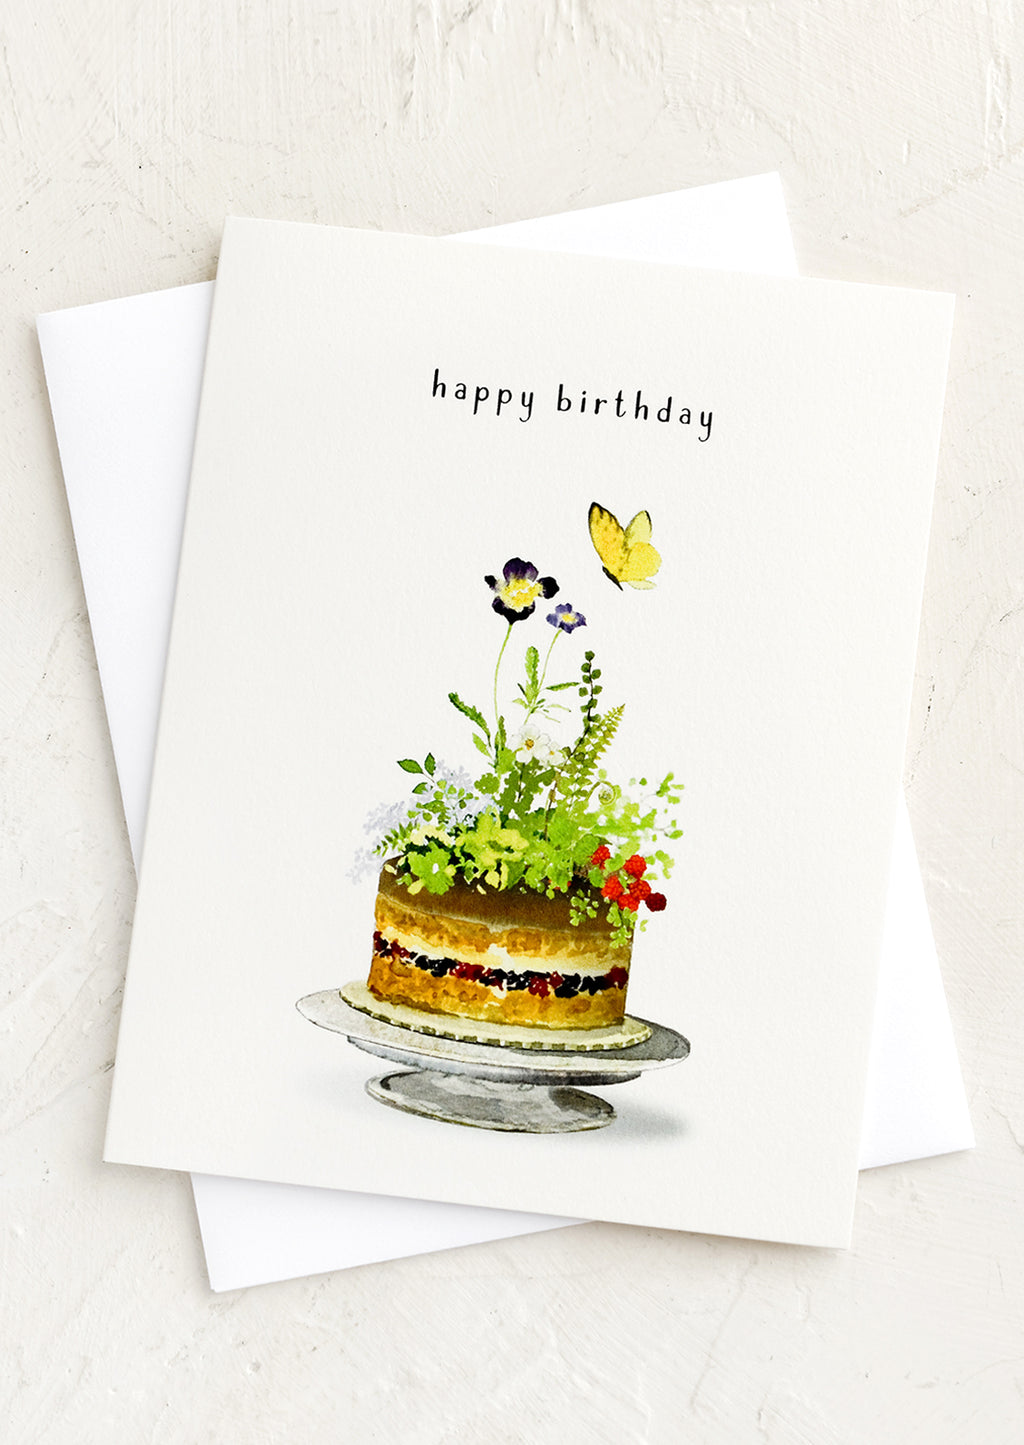 1: A greeting card with illustration of floral cake, text above reads "happy birthday".